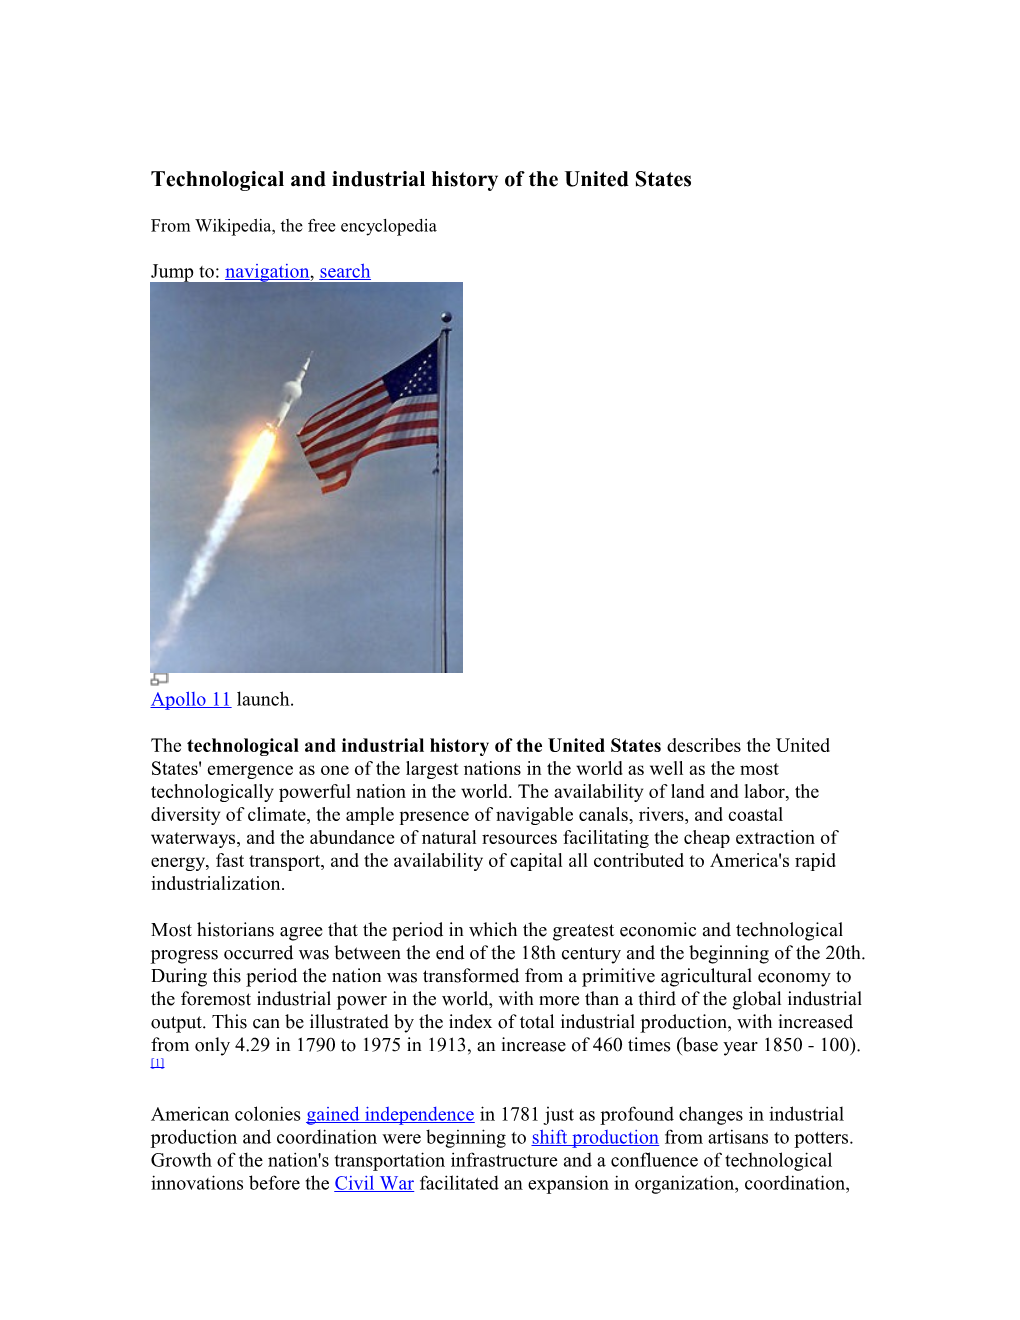 Technological and Industrial History of the United States